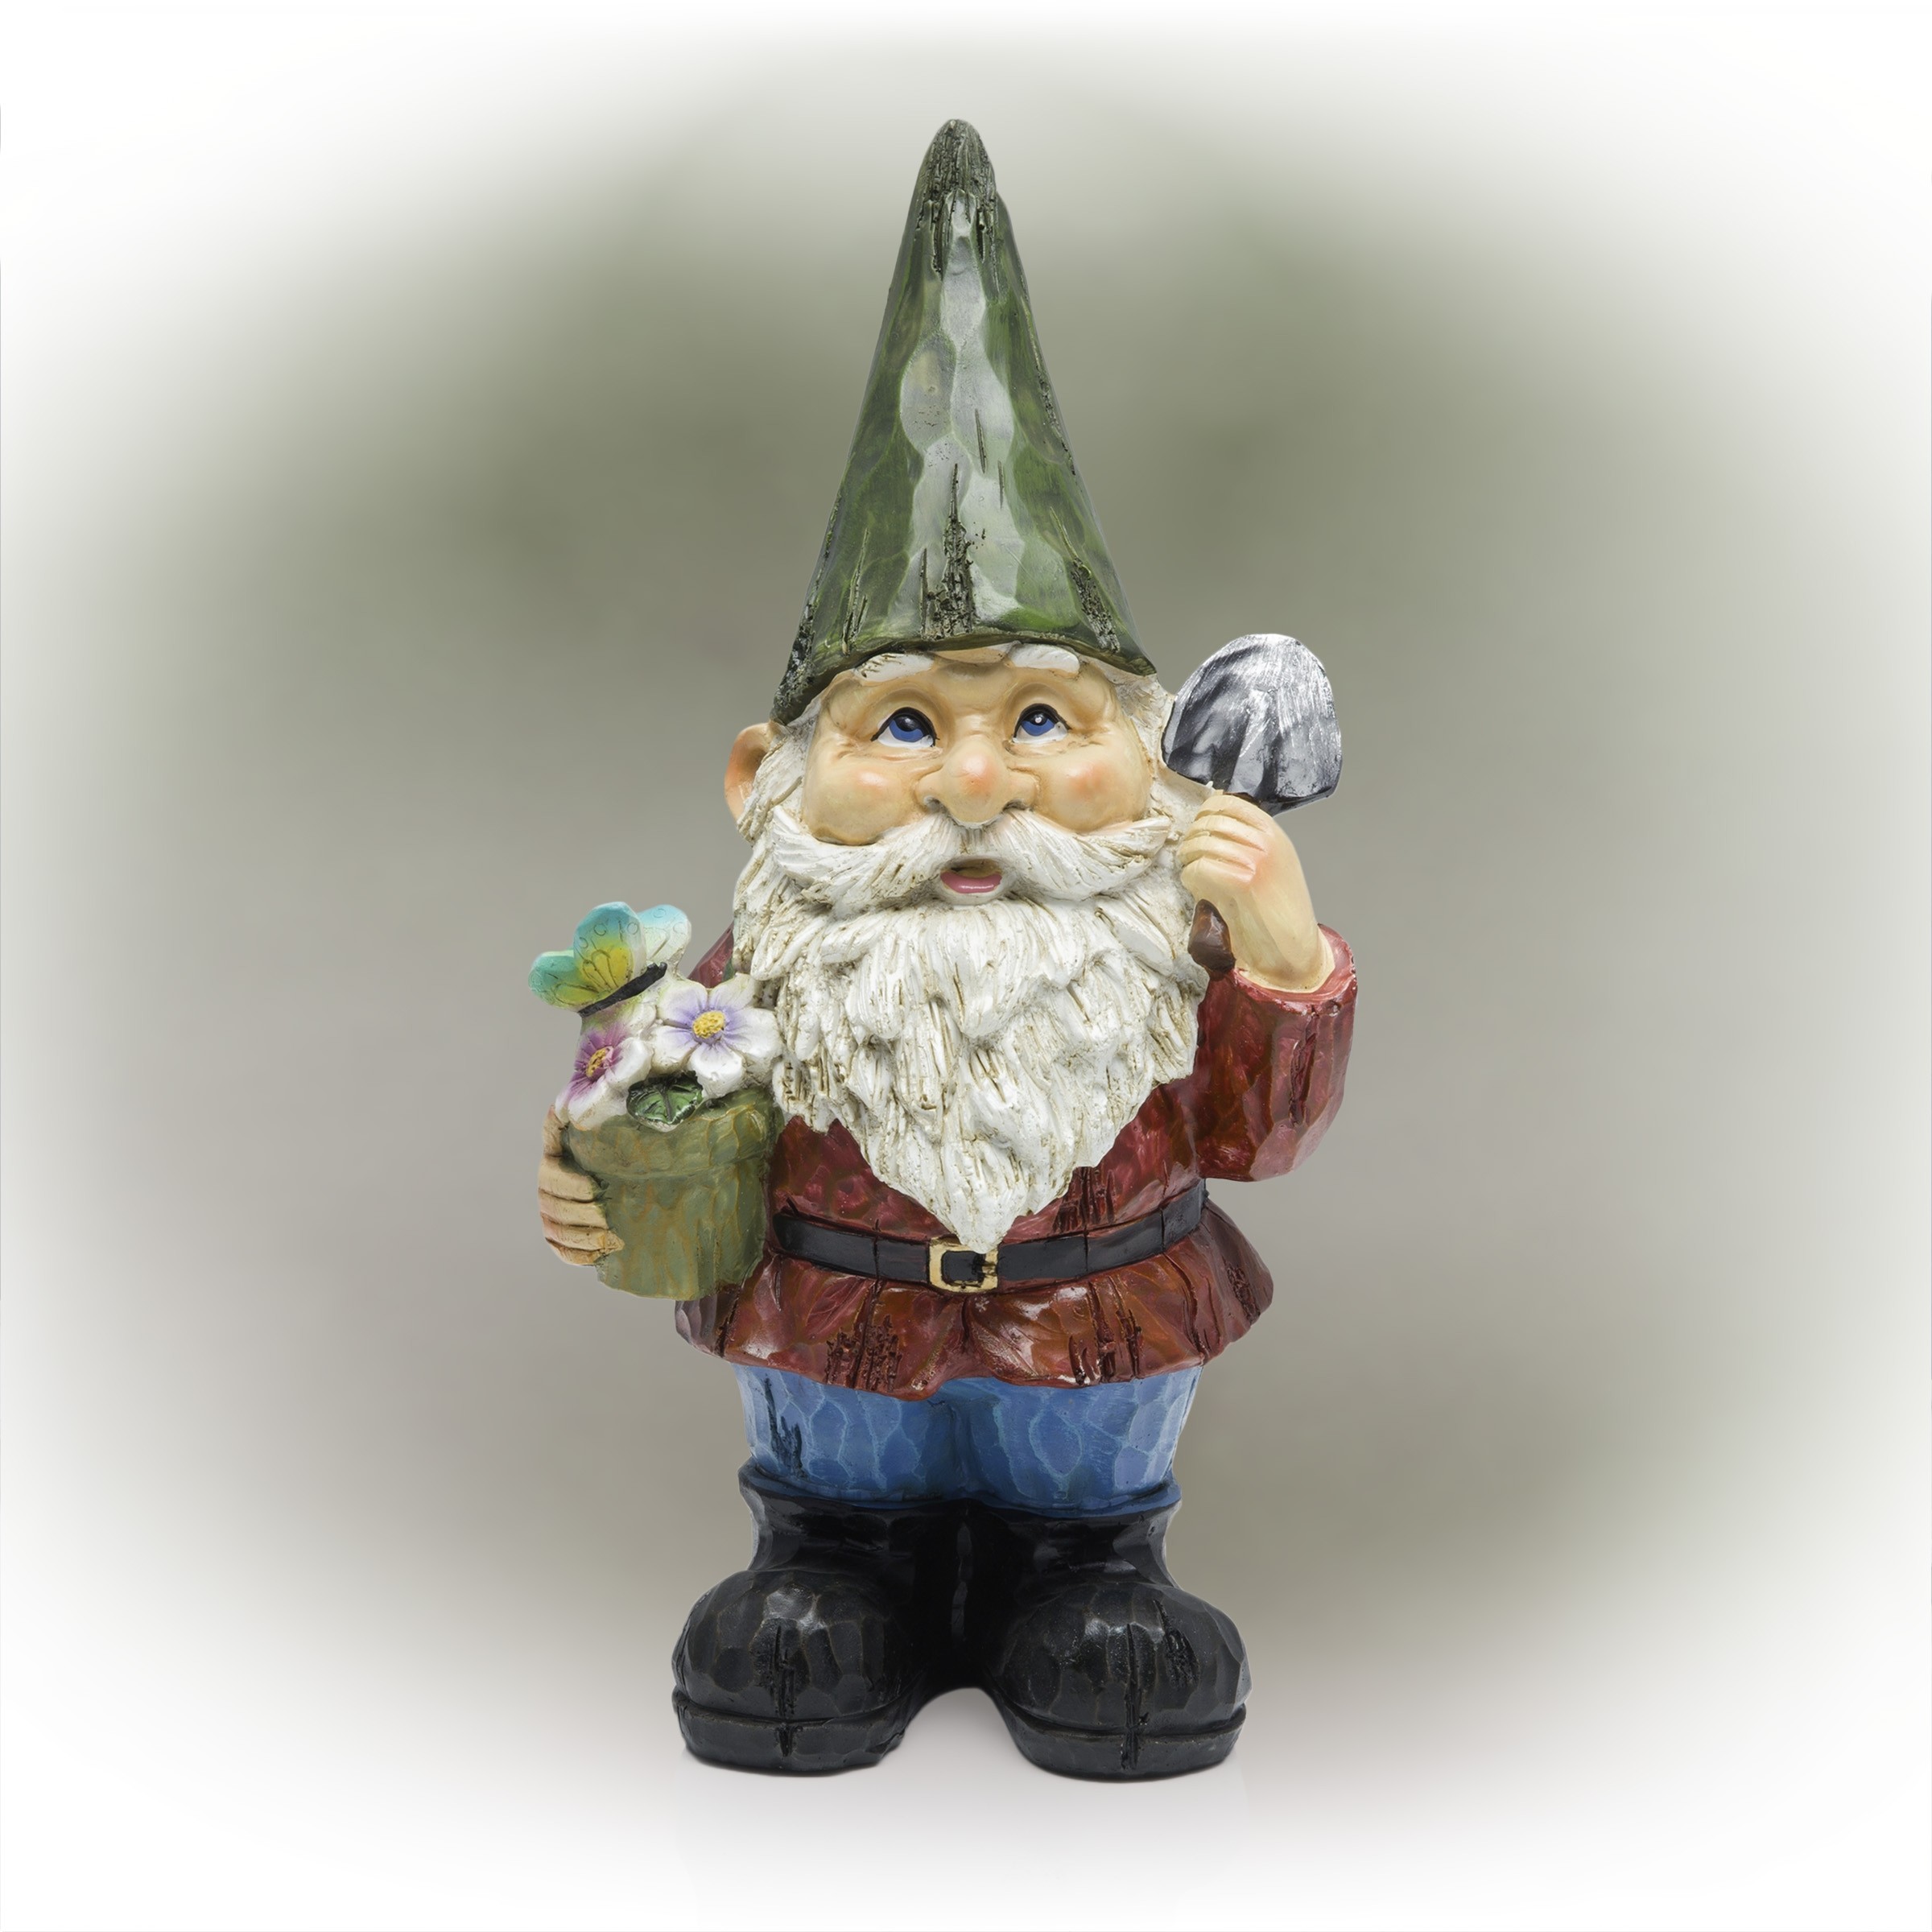 12" Green Hat Gnome Garden Statue with Flower Pot on Hand